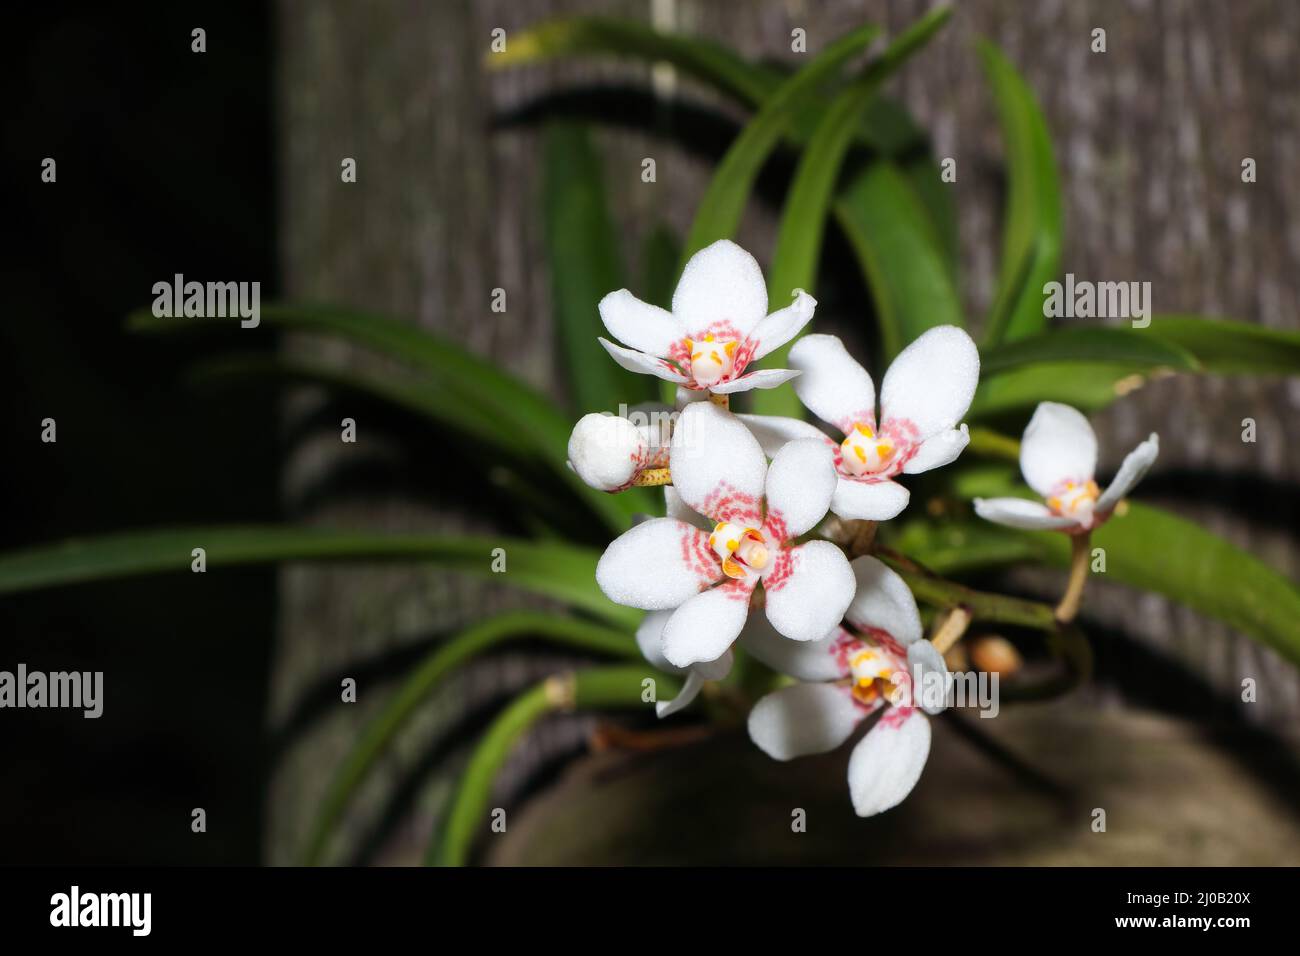 Small White Flowering Orchid On Palm Tree (Vanda sp.) Stock Photo